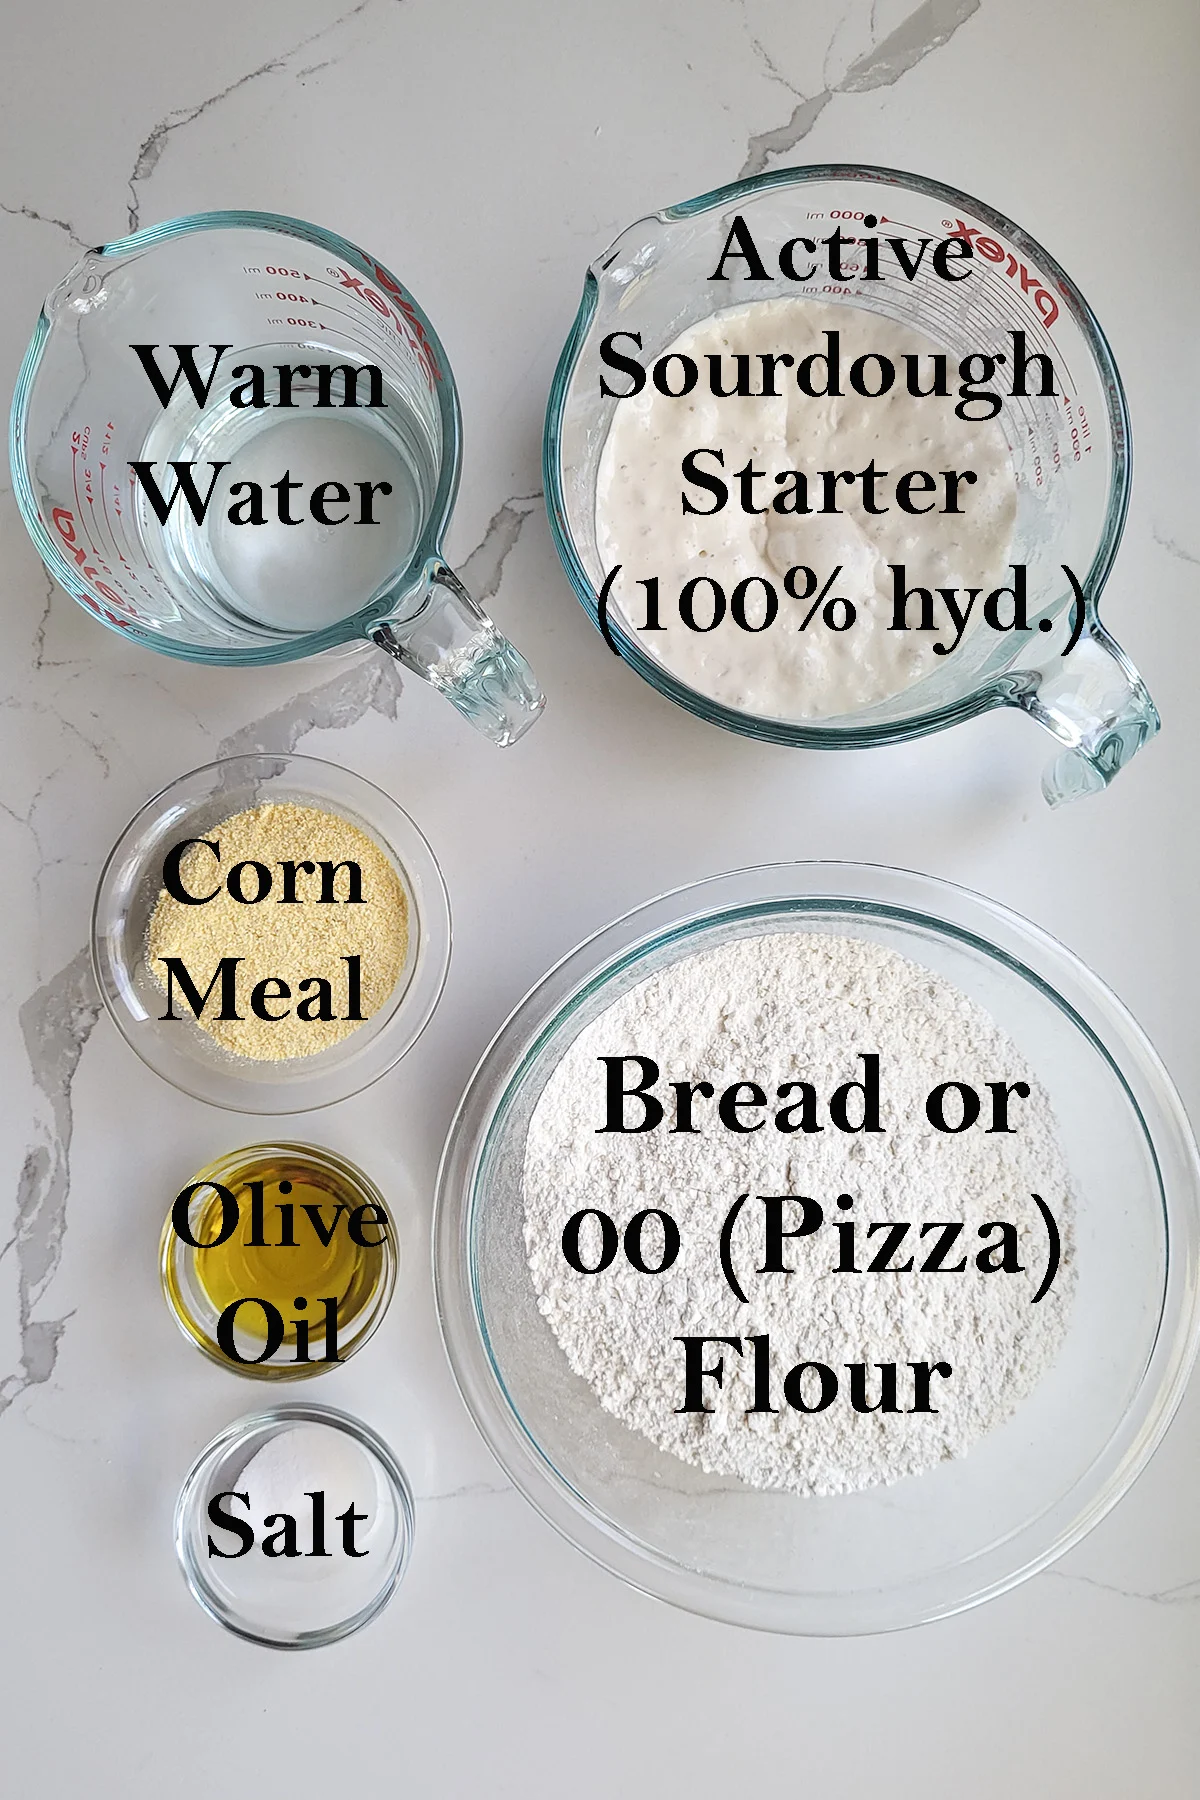 ingredients for sourdough pizza crust in bowls on a white surface.